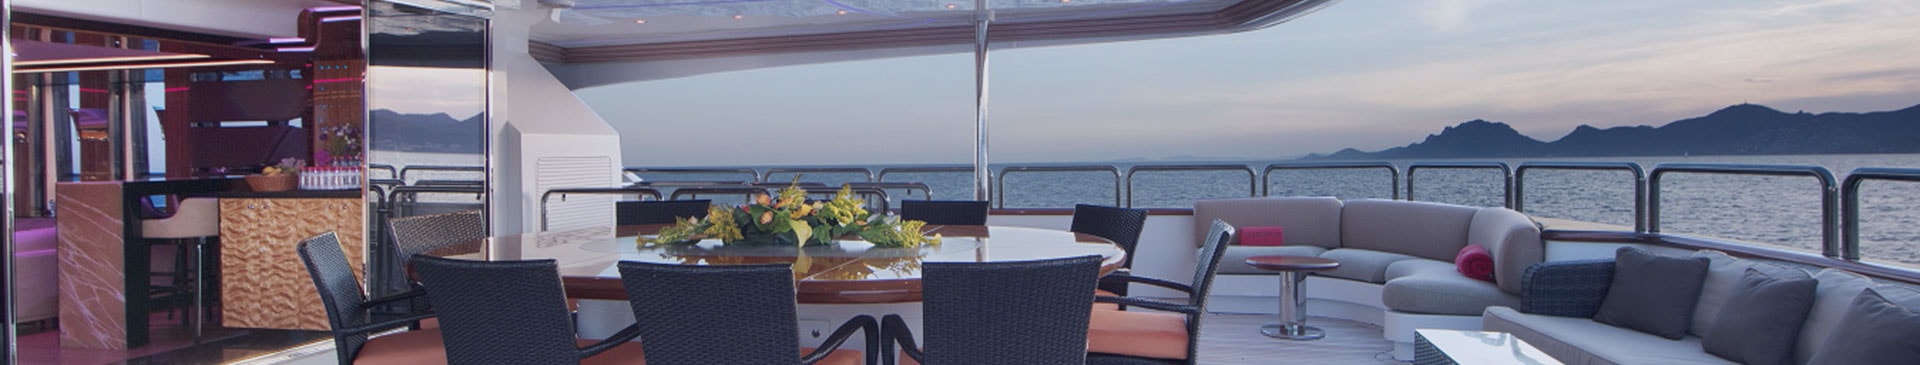 Why a Yacht Cruise Is Ideal During COVID